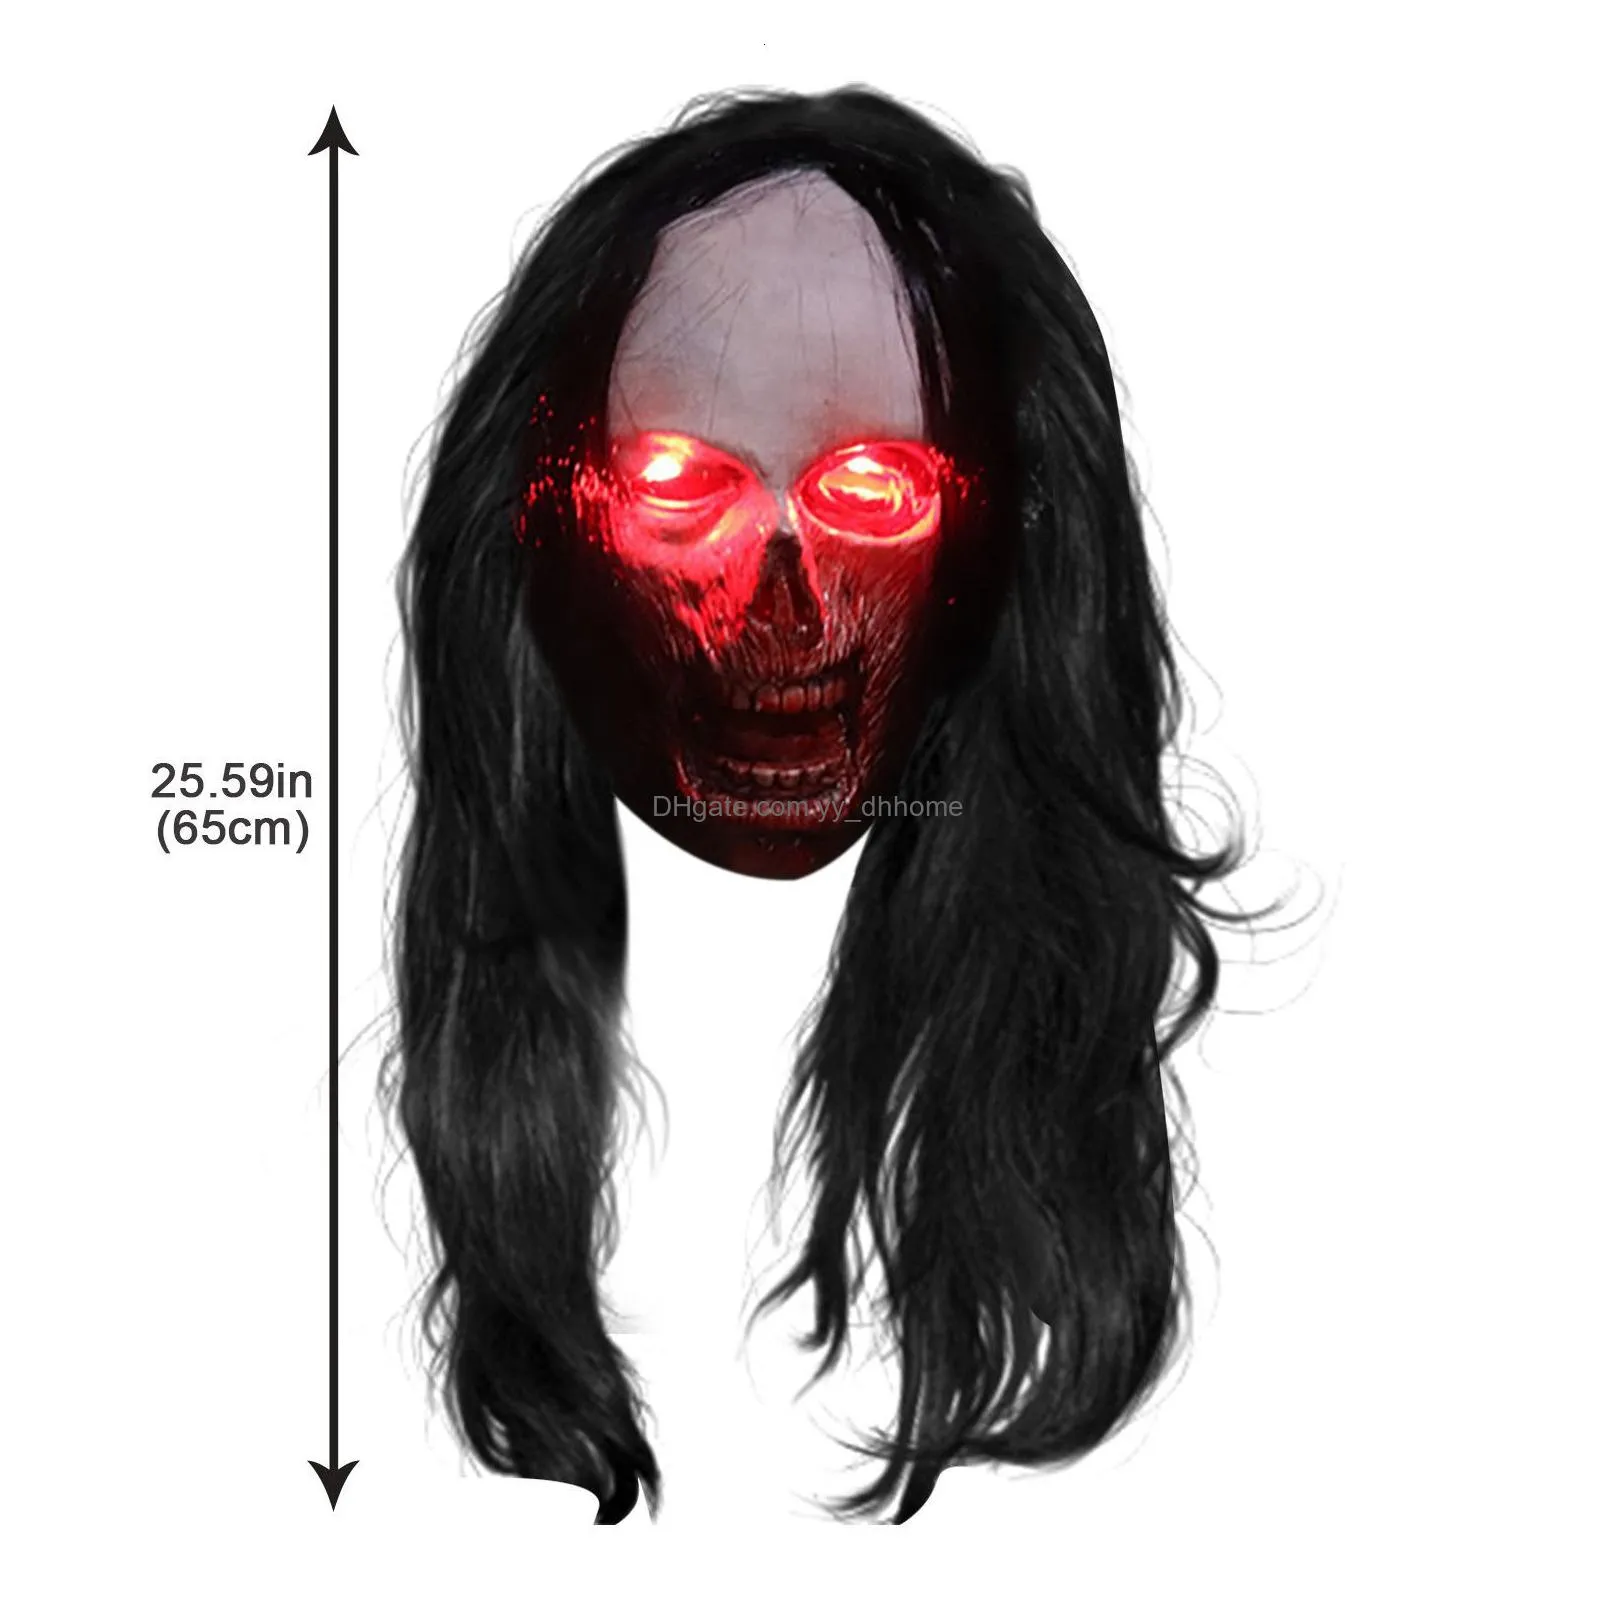 party masks halloween mask luminous eye terror scary cosplay costume adults zombie headgear ghost funny horror toy 230901